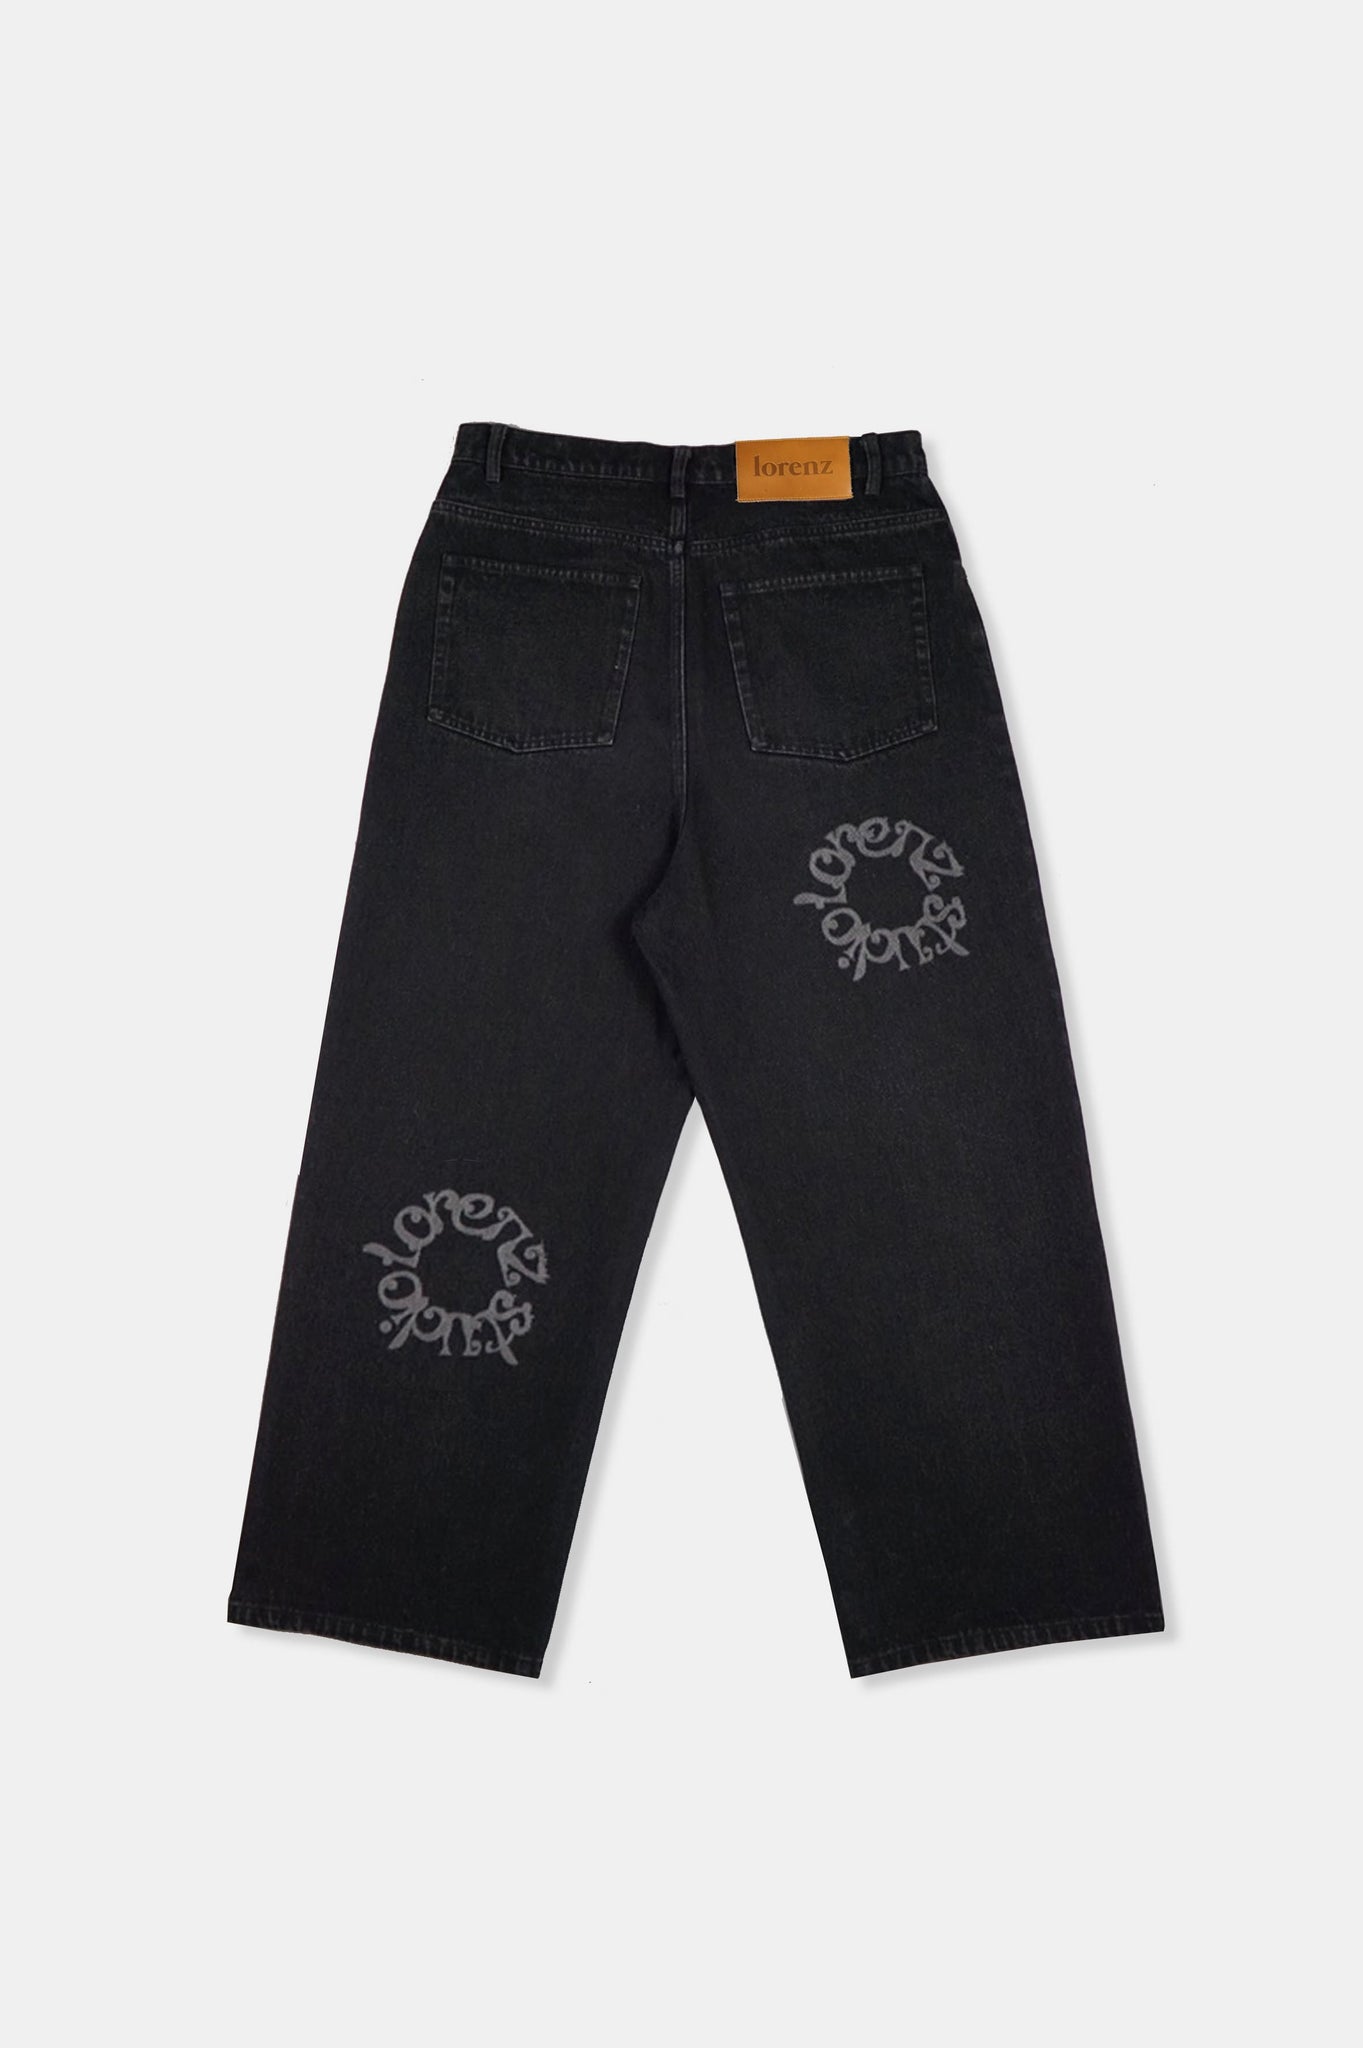 Galaxy Loose Fitted Jeans - Acid Wash Black